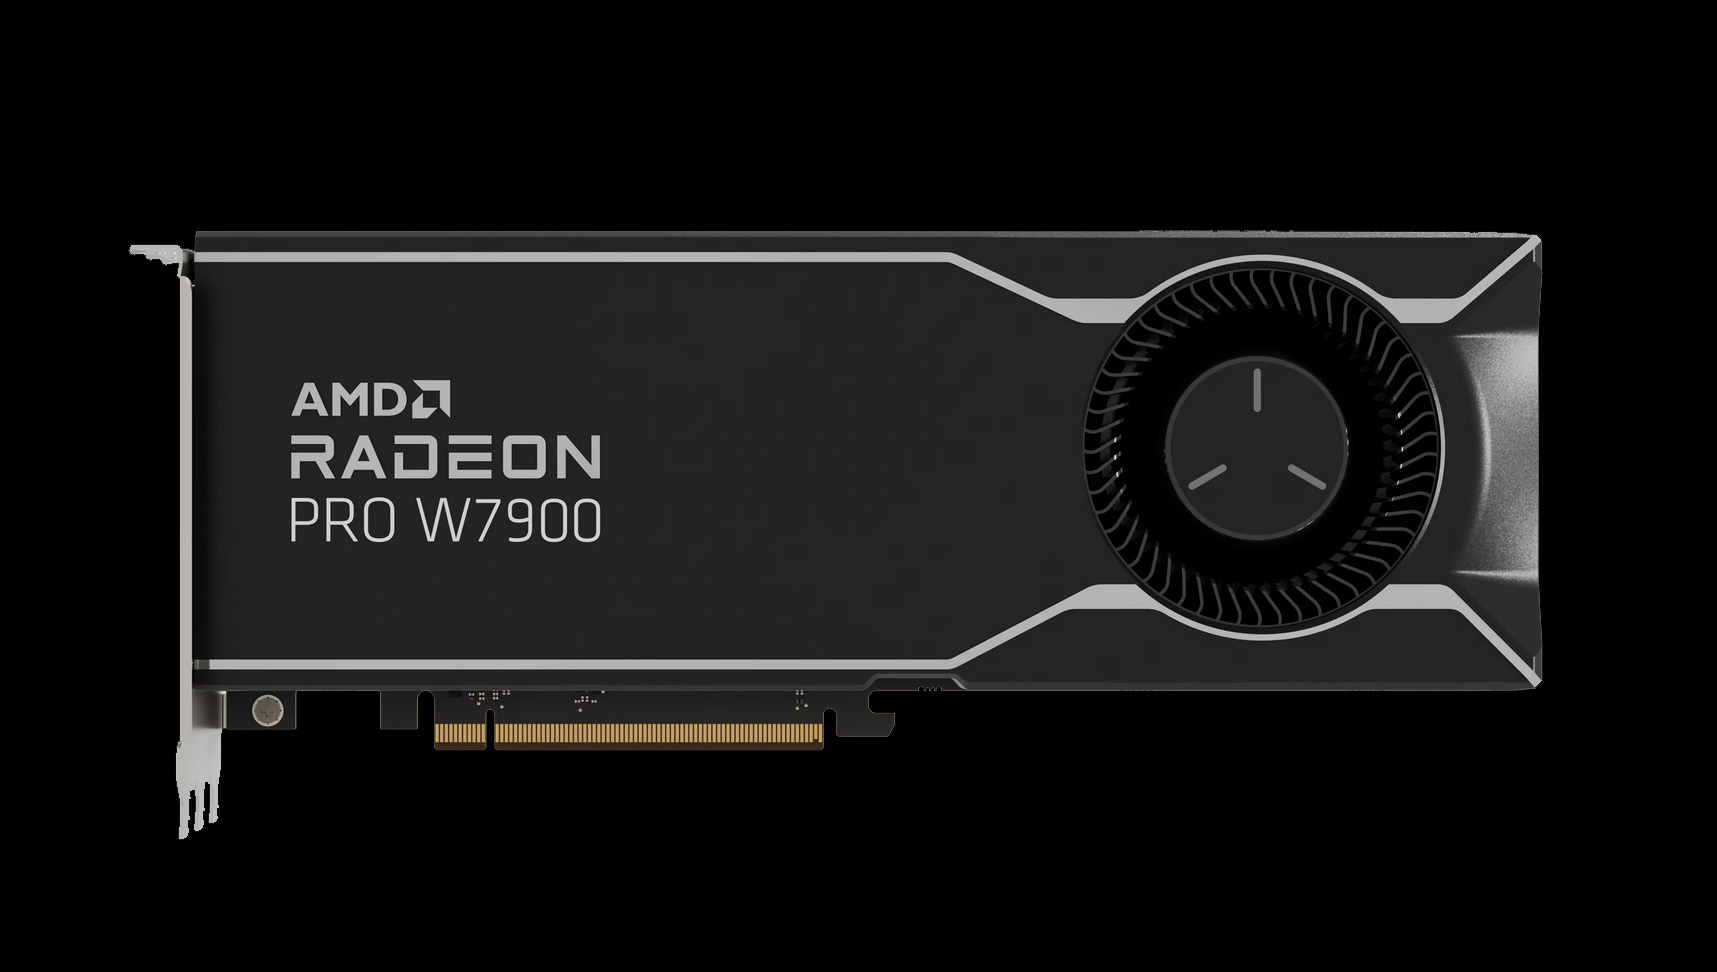 Radeon Pro W7000 GPUs Debut With up to 48GB VRAM, Triple-Slot Blowers